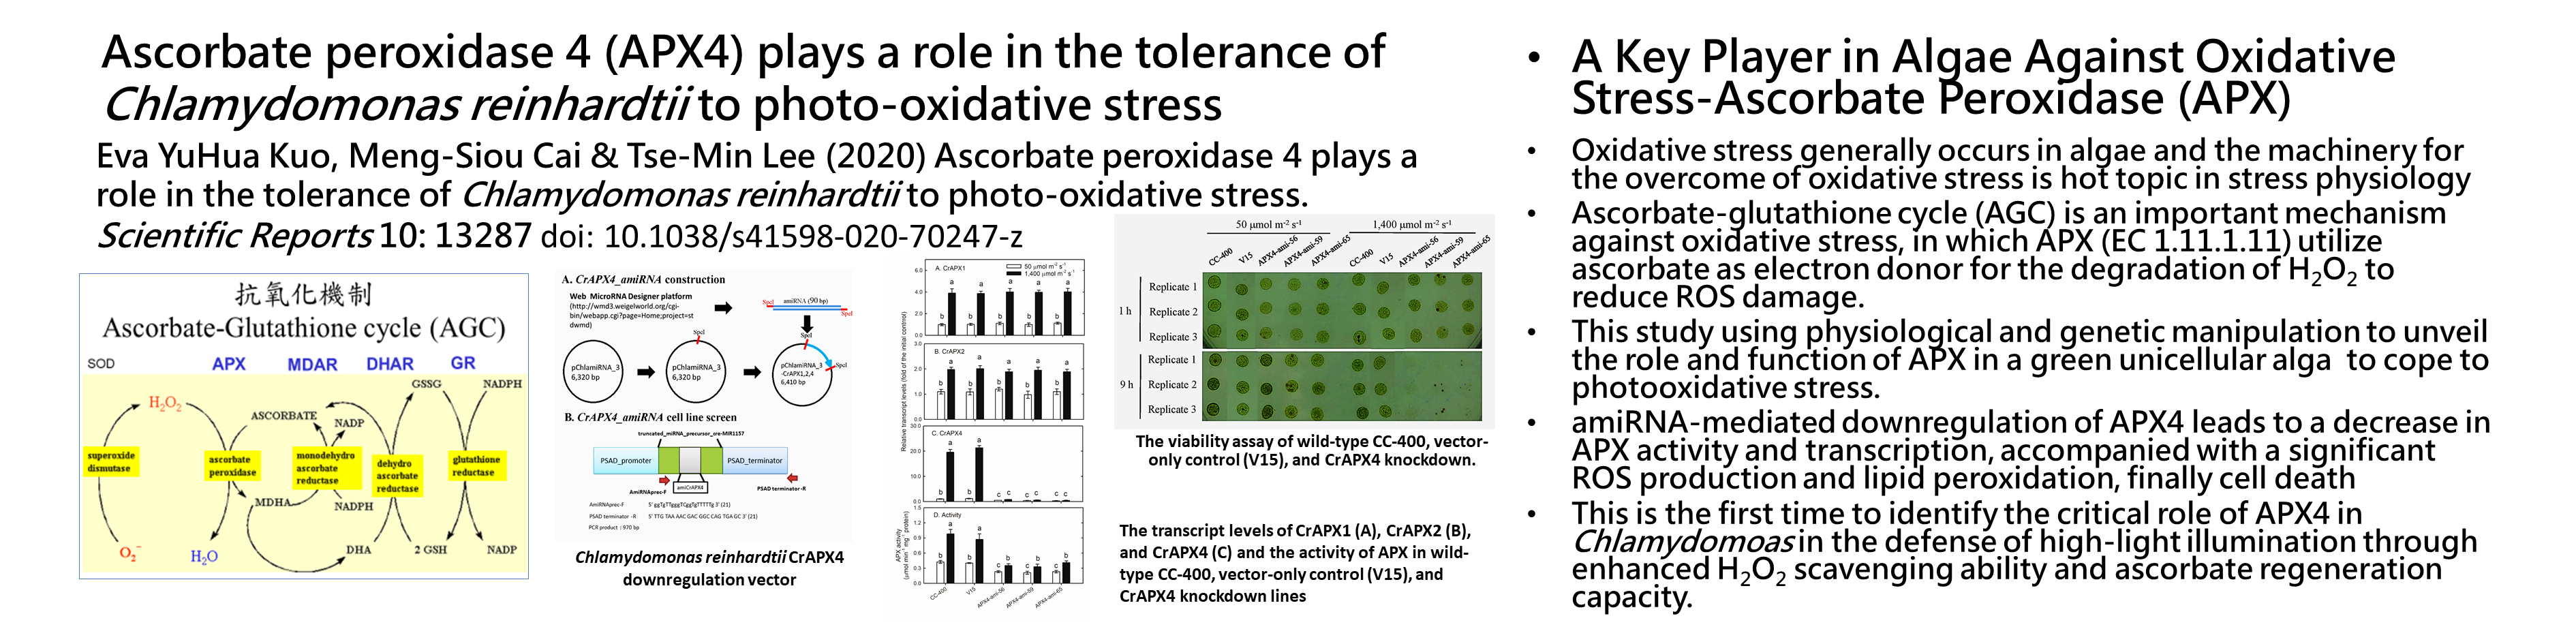 Ascorbate peroxidase 4 (APX4) plays a role in the tolerance of Chlamydomonas reinhardtii to photo‑oxidative stress